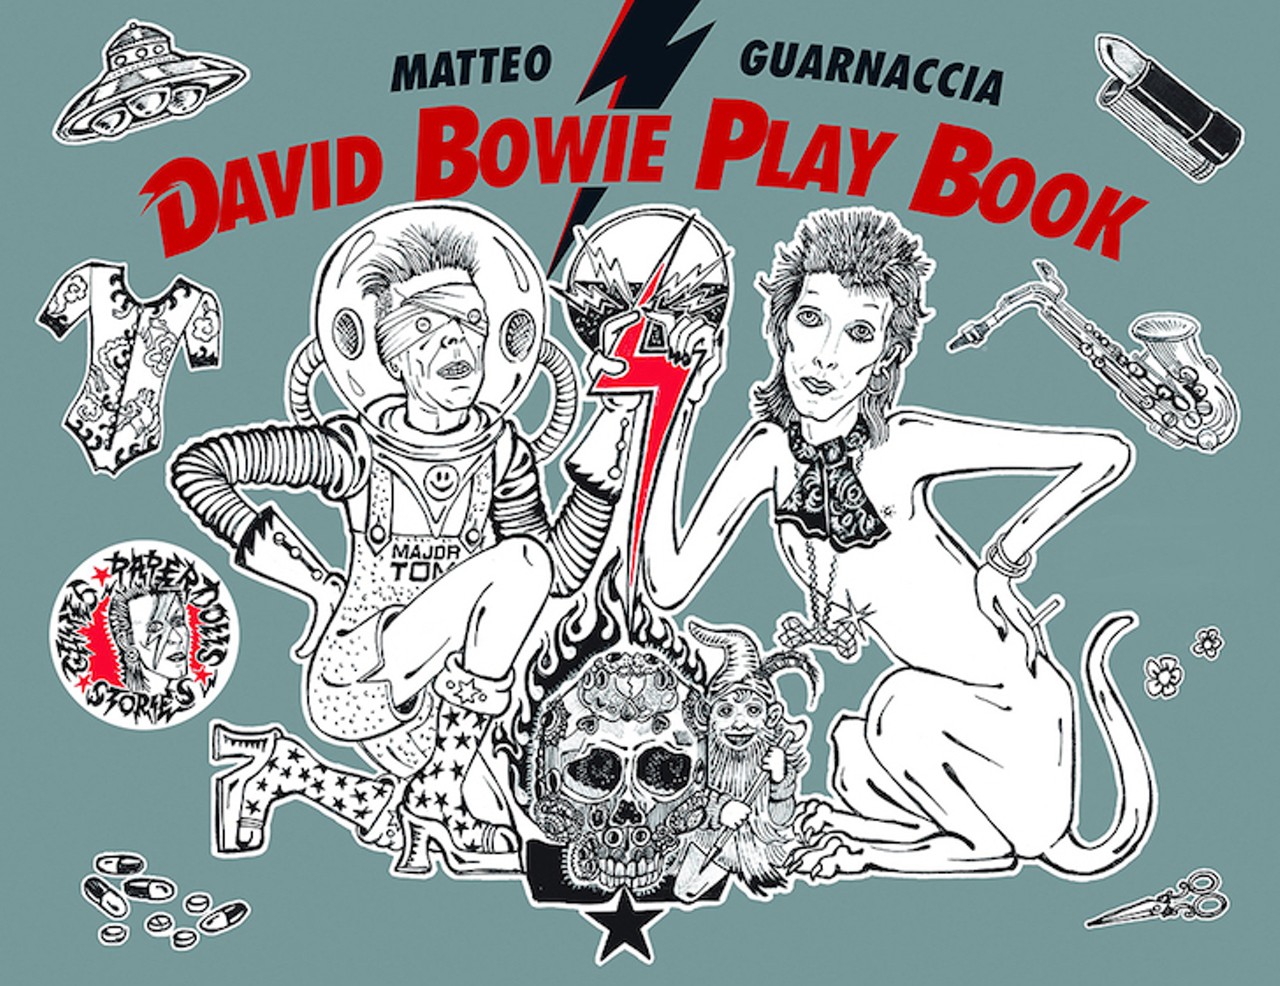  David Bowie Play Book, by Matteo Guarnaccia and Giulia Pivetta (ACC Editions, 96 pages, $29.95)
The old truism that "the clothes make the man," was never more true than in the case of Bowie. More than a mere slave to fashion, though, he created whole personas and lyrical universes out of what he wore. This quirky, oversize tome one-ups "adult coloring books" to present "adult paper-doll books," wherein you may dress your own Bowies as you please from a dazzling area of actual stagewear.